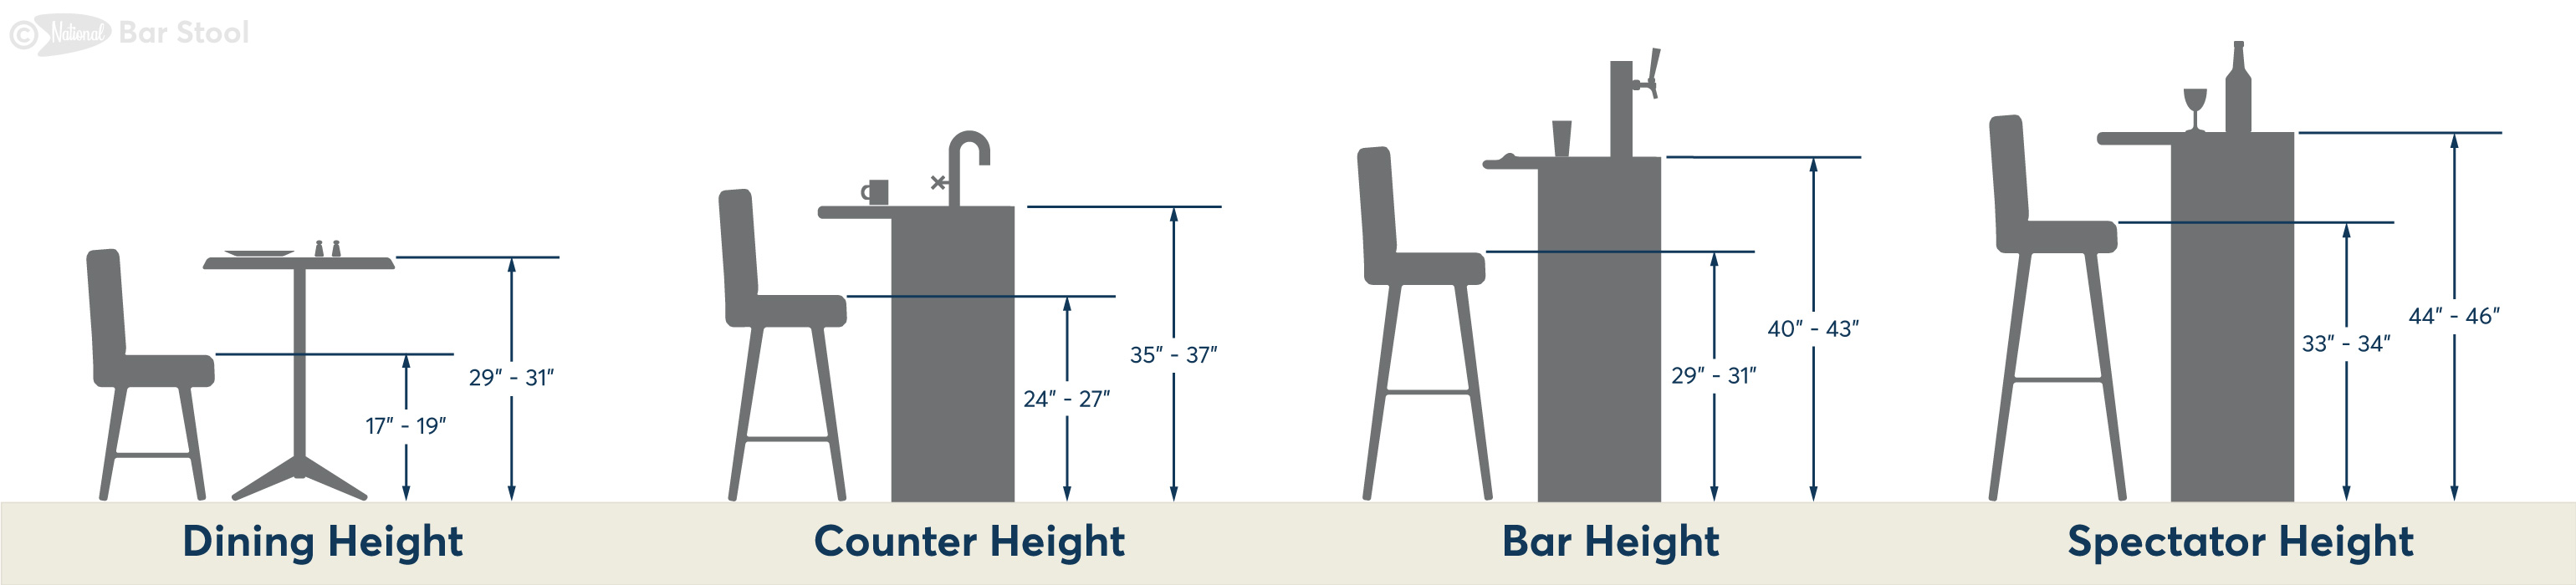 Bar Stool Ing Guide National, How To Measure A Bar Stool